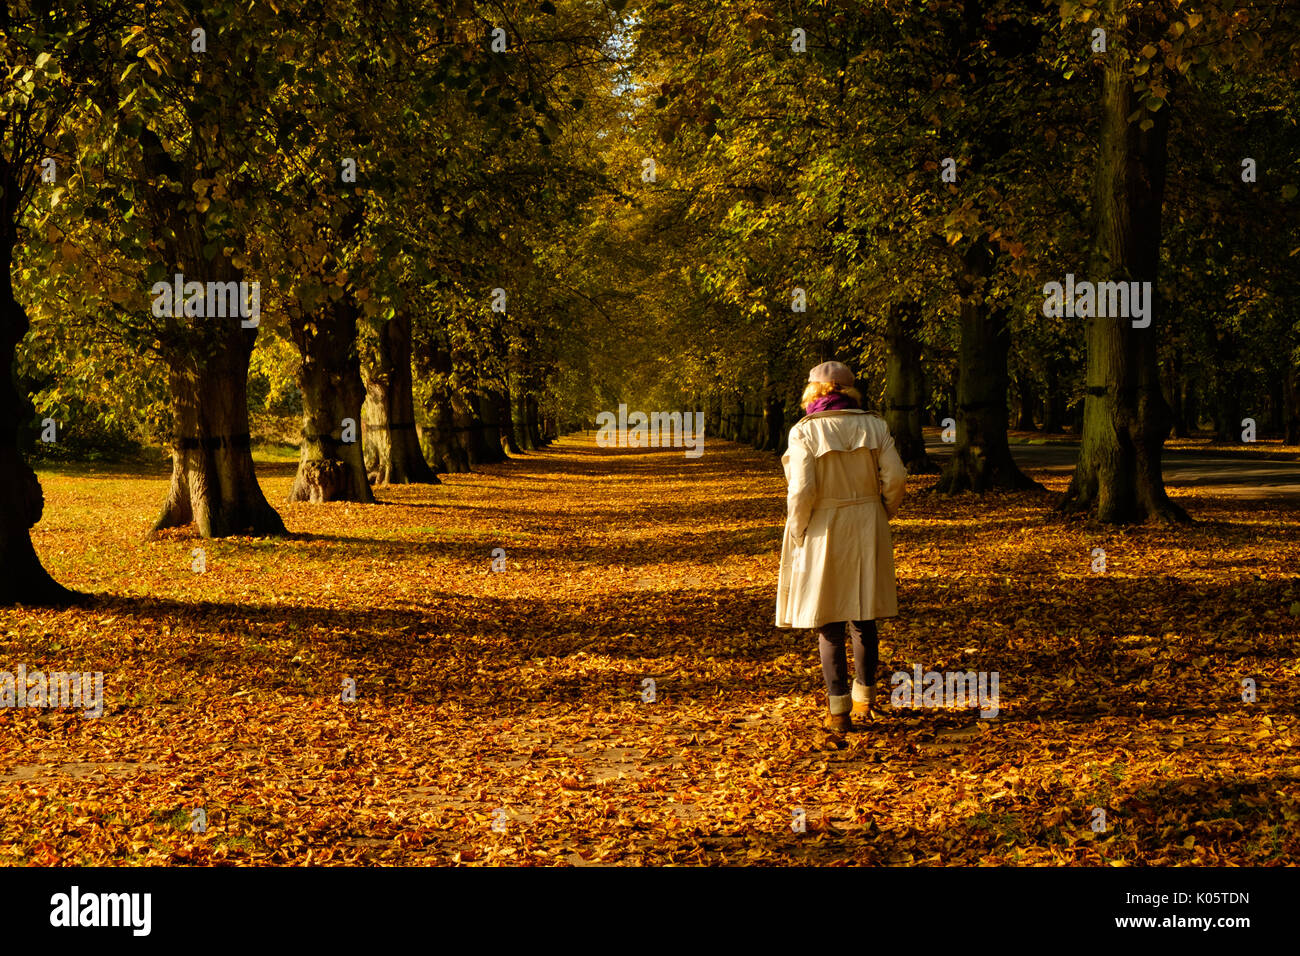 Woman walking alone in autumn trees. Lime tree avenue in Clumber Park. Stock Photo